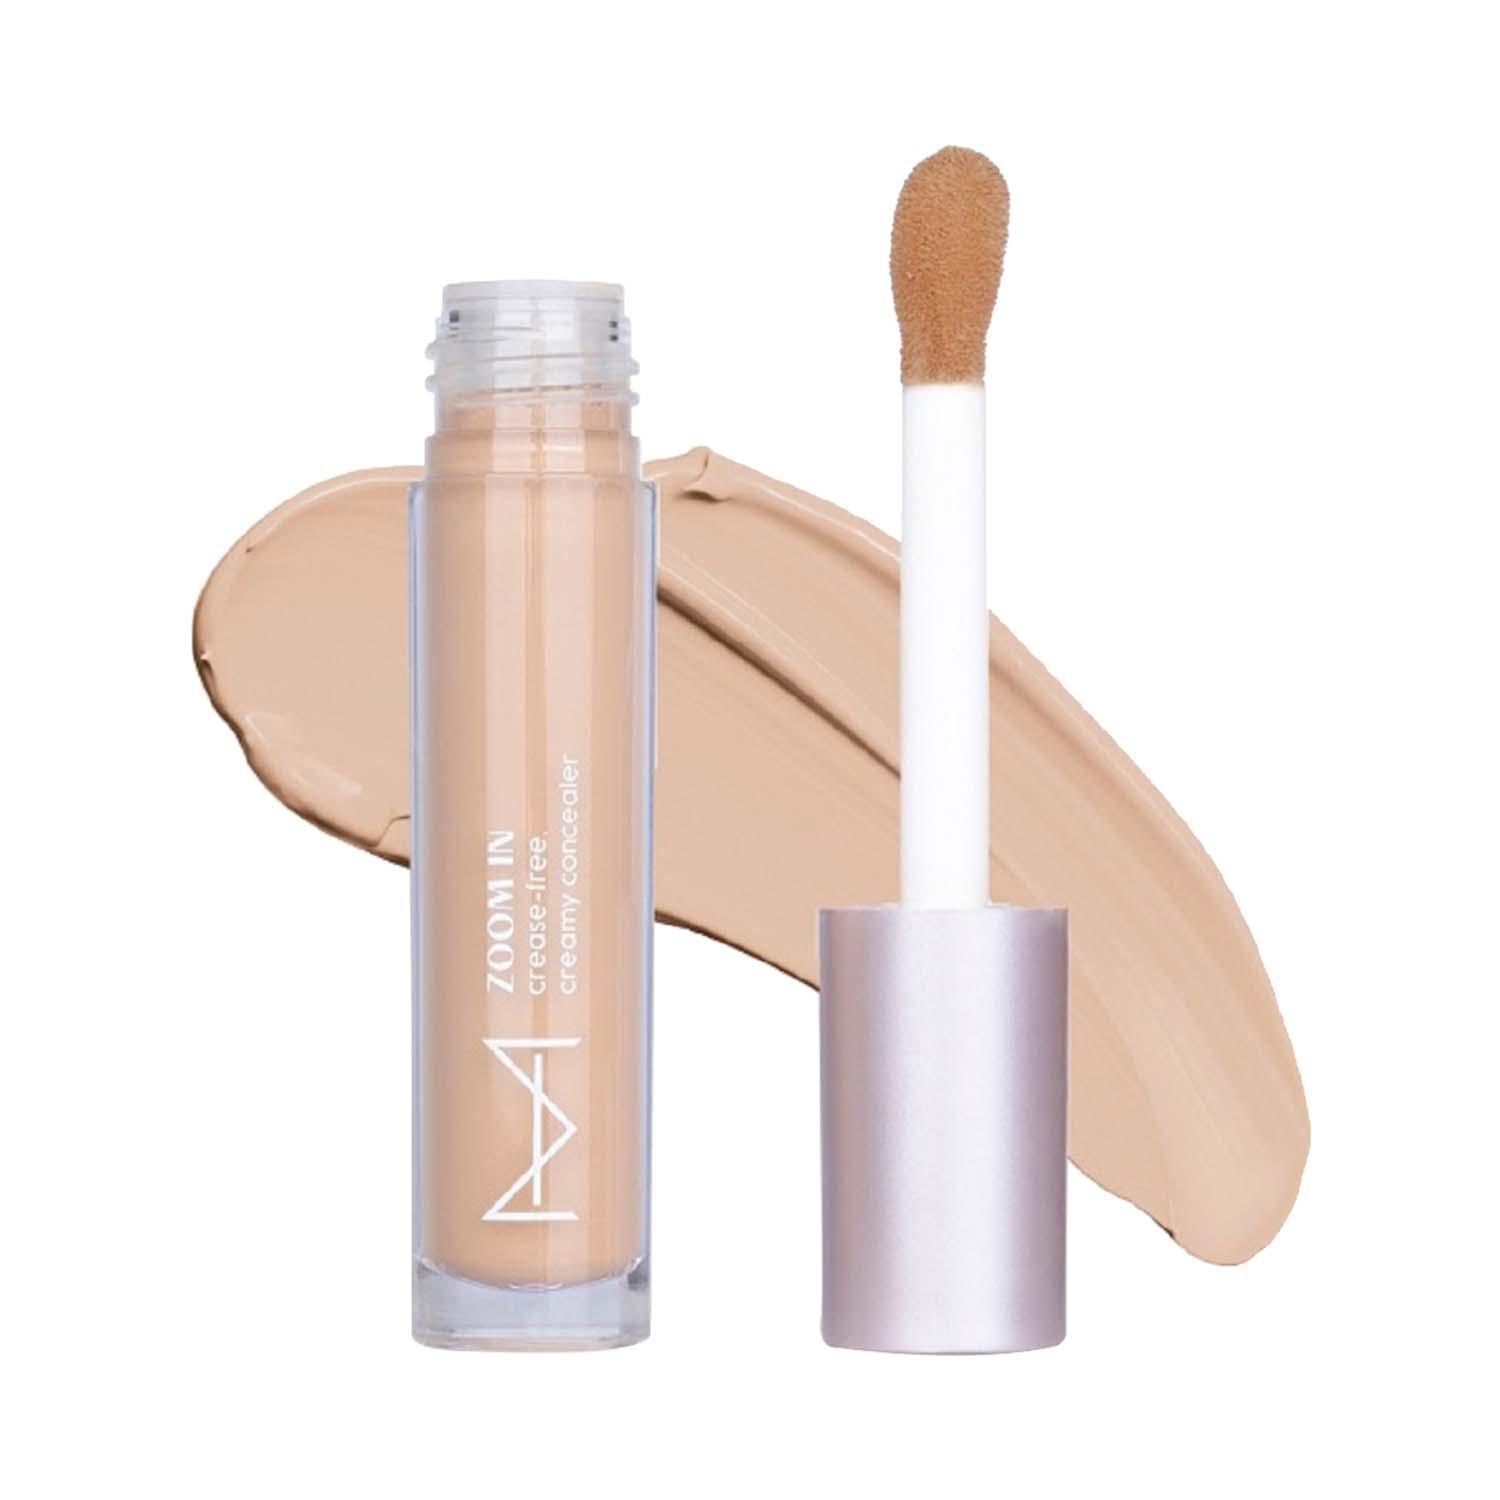 HOUSE OF MAKEUP | HOUSE OF MAKEUP Zoom In Crease-Free, Creamy Concealer - MD01 Medium To Deep Skin Tone (6 ml)